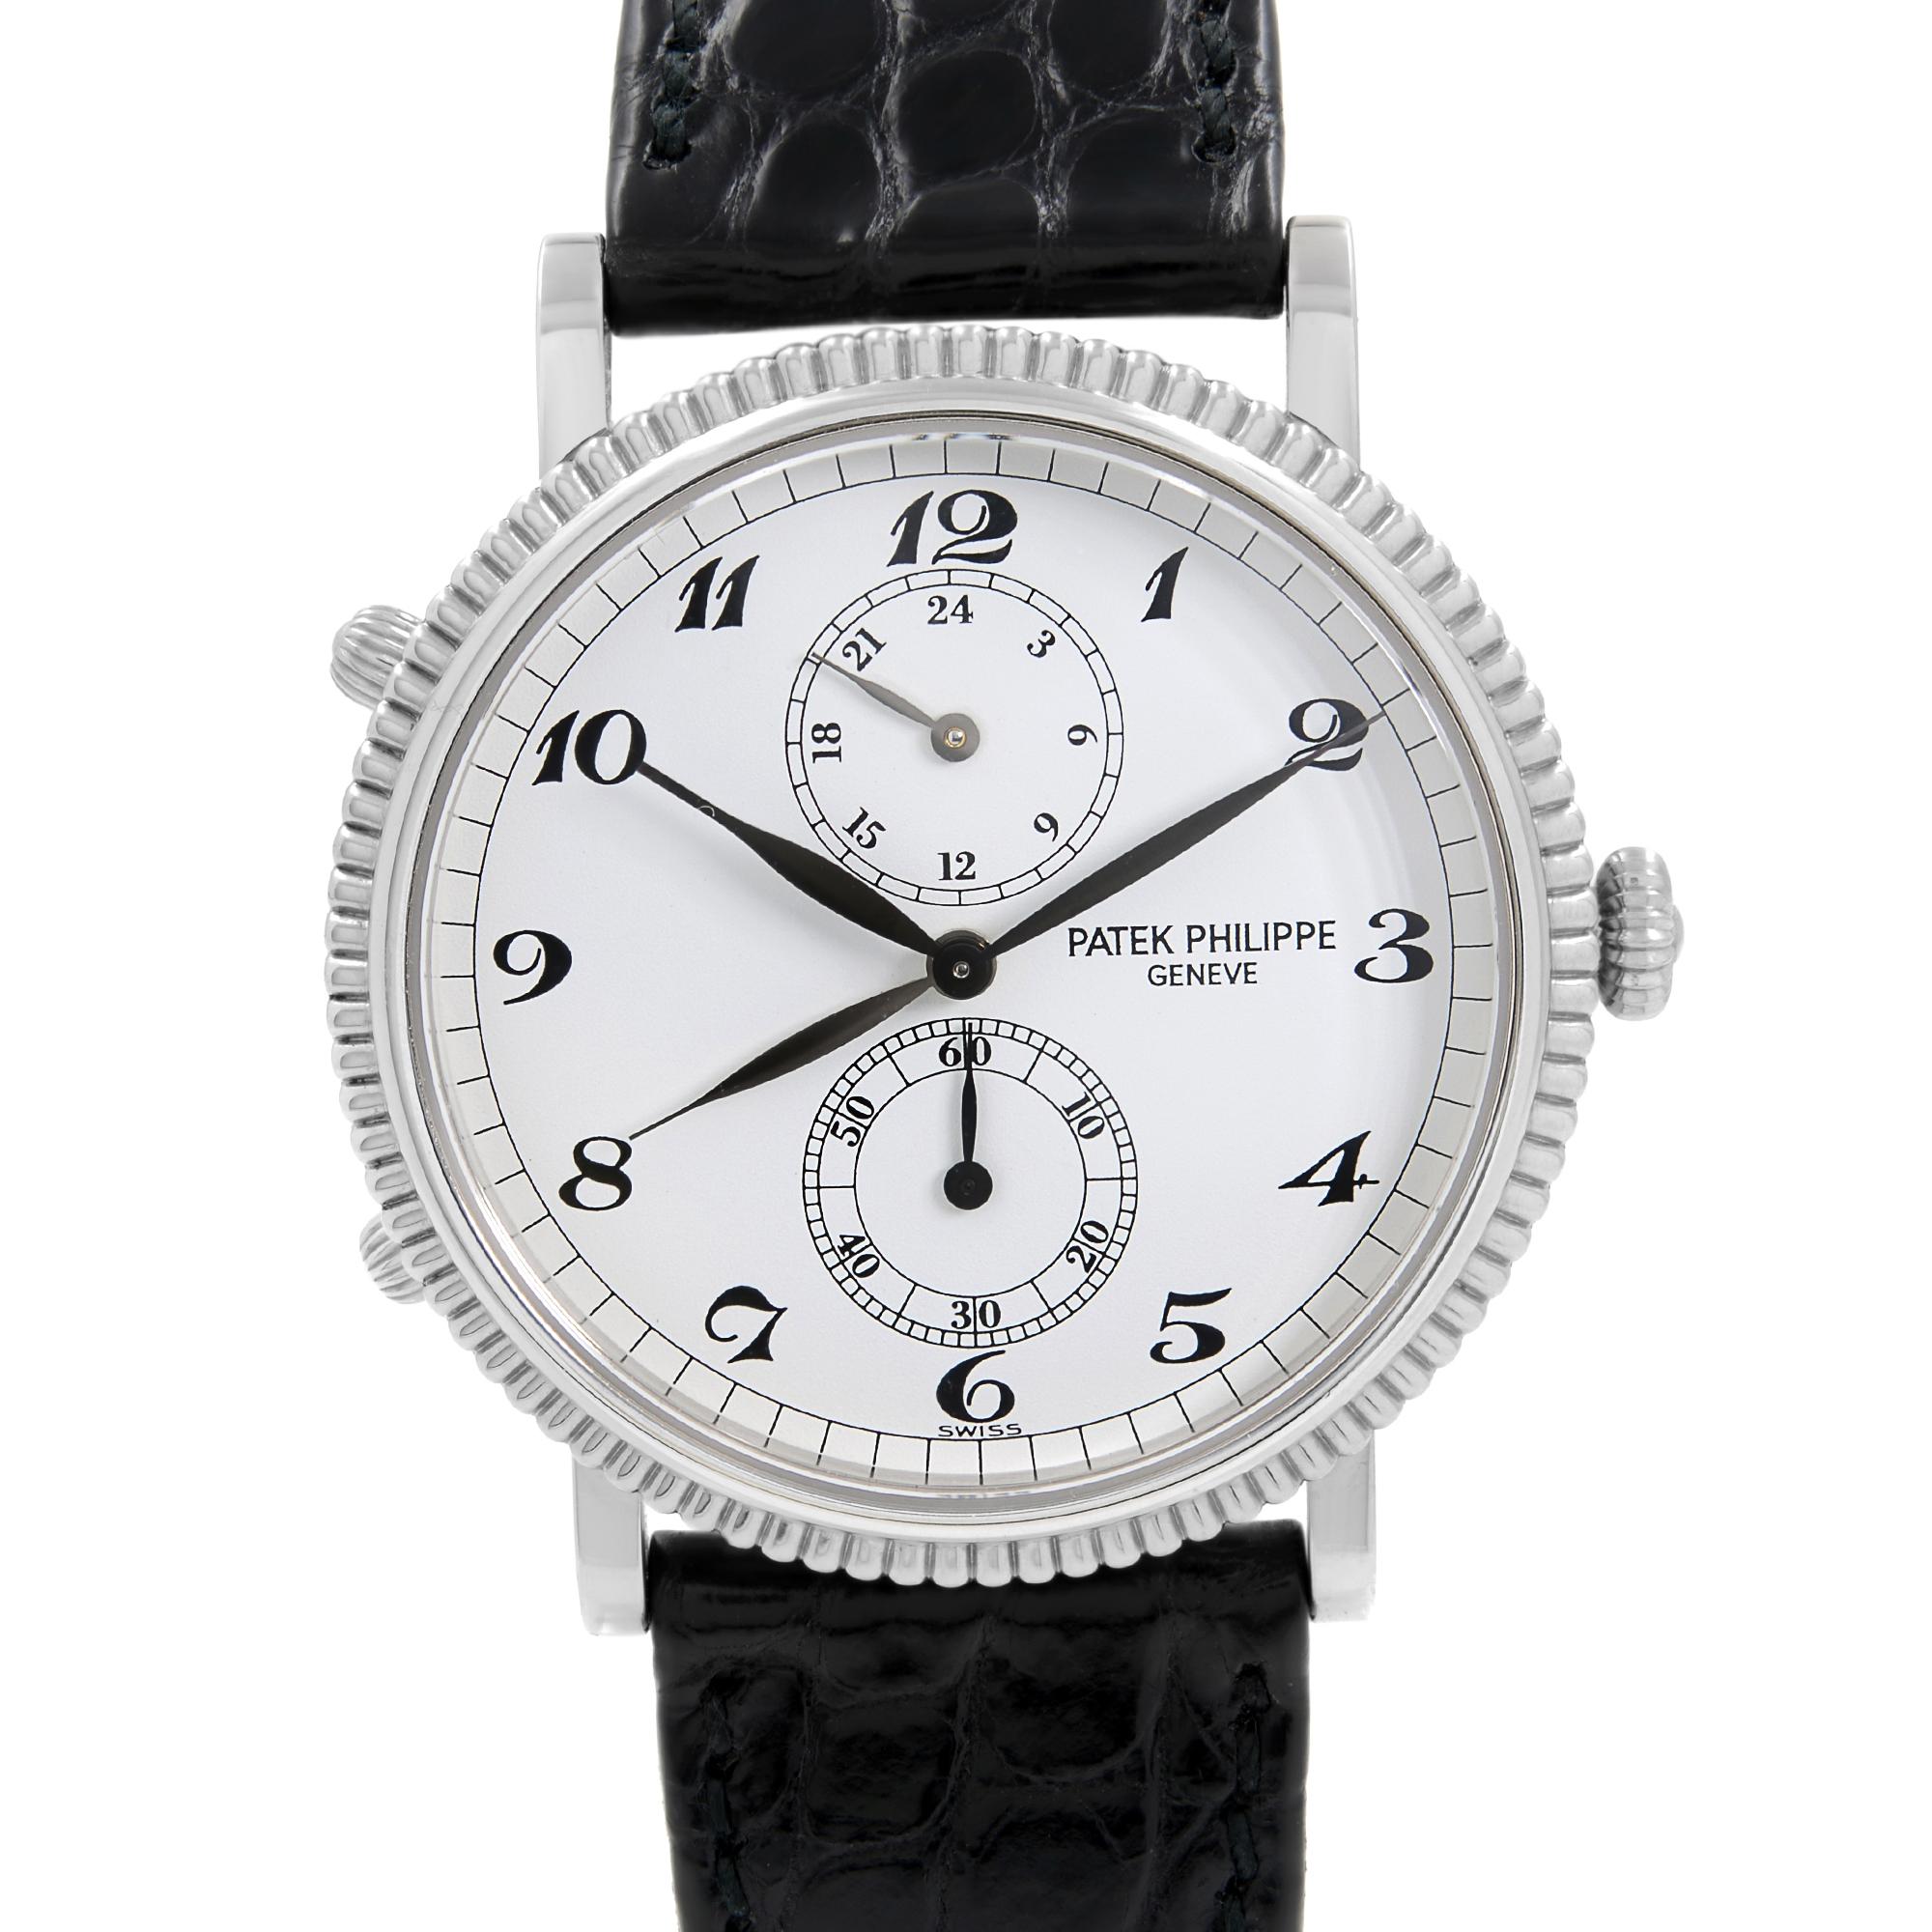 Small Stain on the Inner Leather Strap. Pre-owned Patek Philippe Travel Time 18k White Gold Black Crocodile Strap Men's Watch 5034G This Beautiful Timepiece is Powered by a Mechanical (Manual-Wind ) Movement Round White Gold Case & Black Crocodile